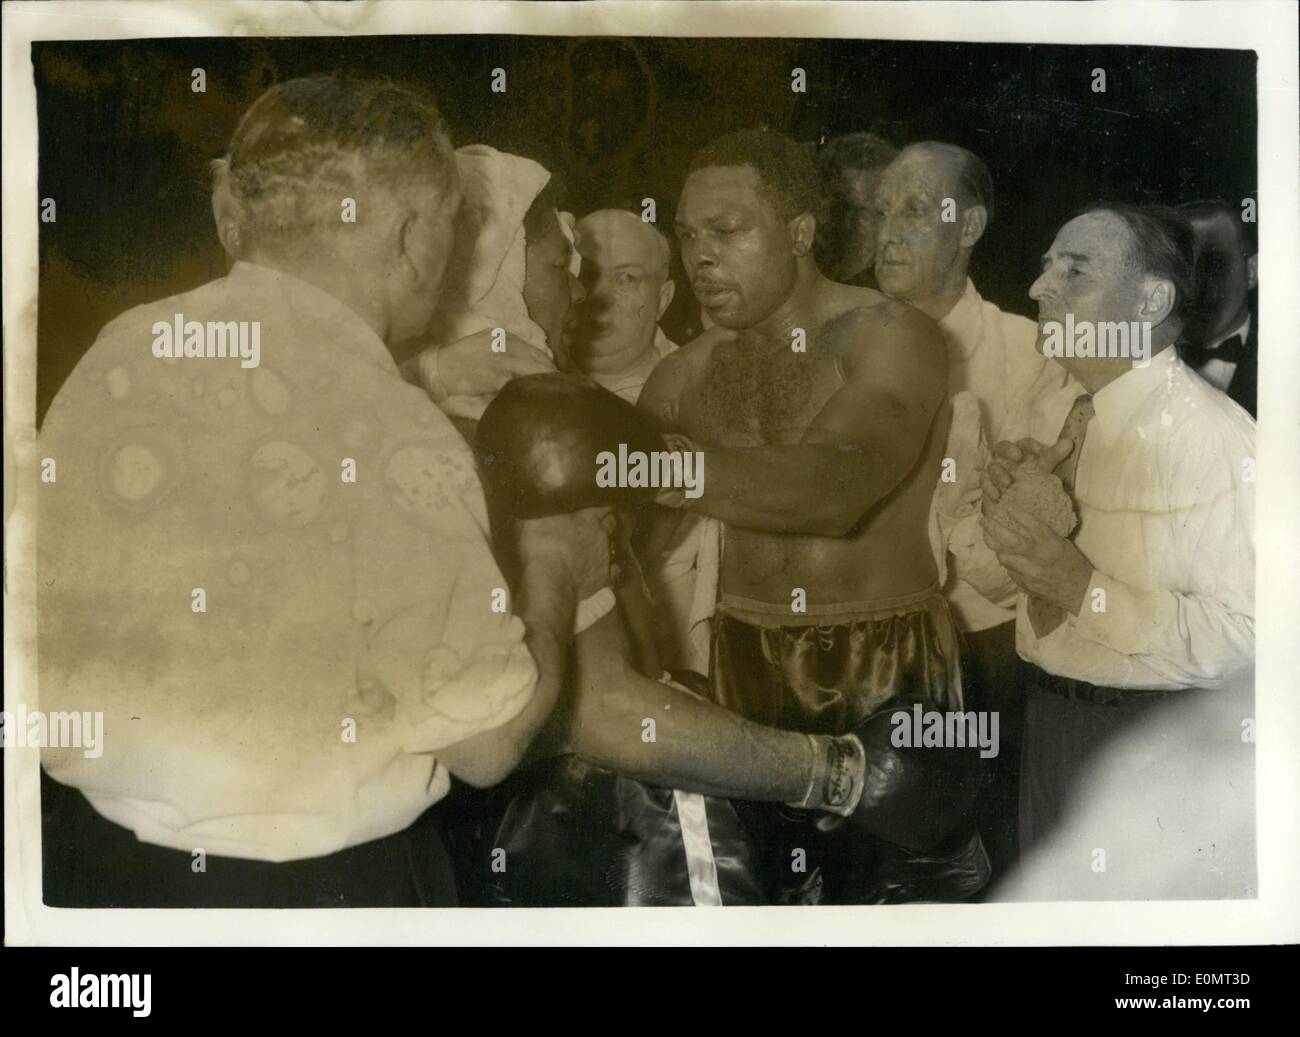 Jun. 06, 1956 - Archie Moore retails his light - heavy weight title. Beats Yolande Pompey in tenth round. Archie Moore the light heavy weight champion on the world - last night retained his title, when he beat Trinidad's Yola De Pompey - the referee stopping the contest in the tenth round - at Harringay. photo shows Archie Moore Inspects the injuries which he inflicted on Yolande Pompey after his victory at Harringay last night. Stock Photo